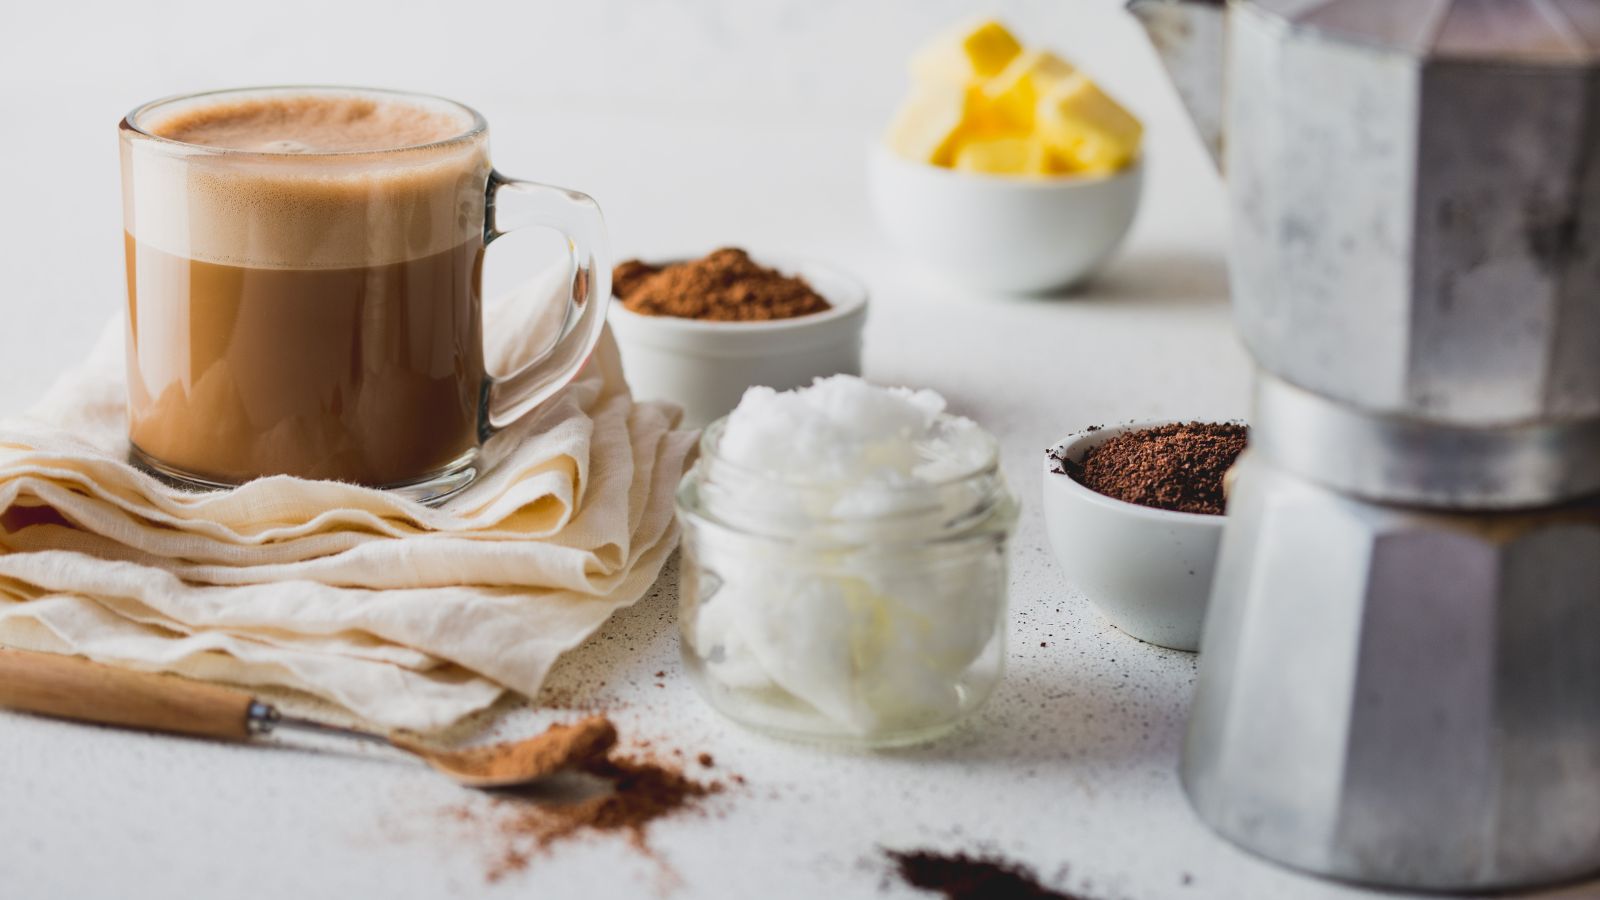 Best Blenders for Bulletproof Coffee (and Other Hot Liquids)